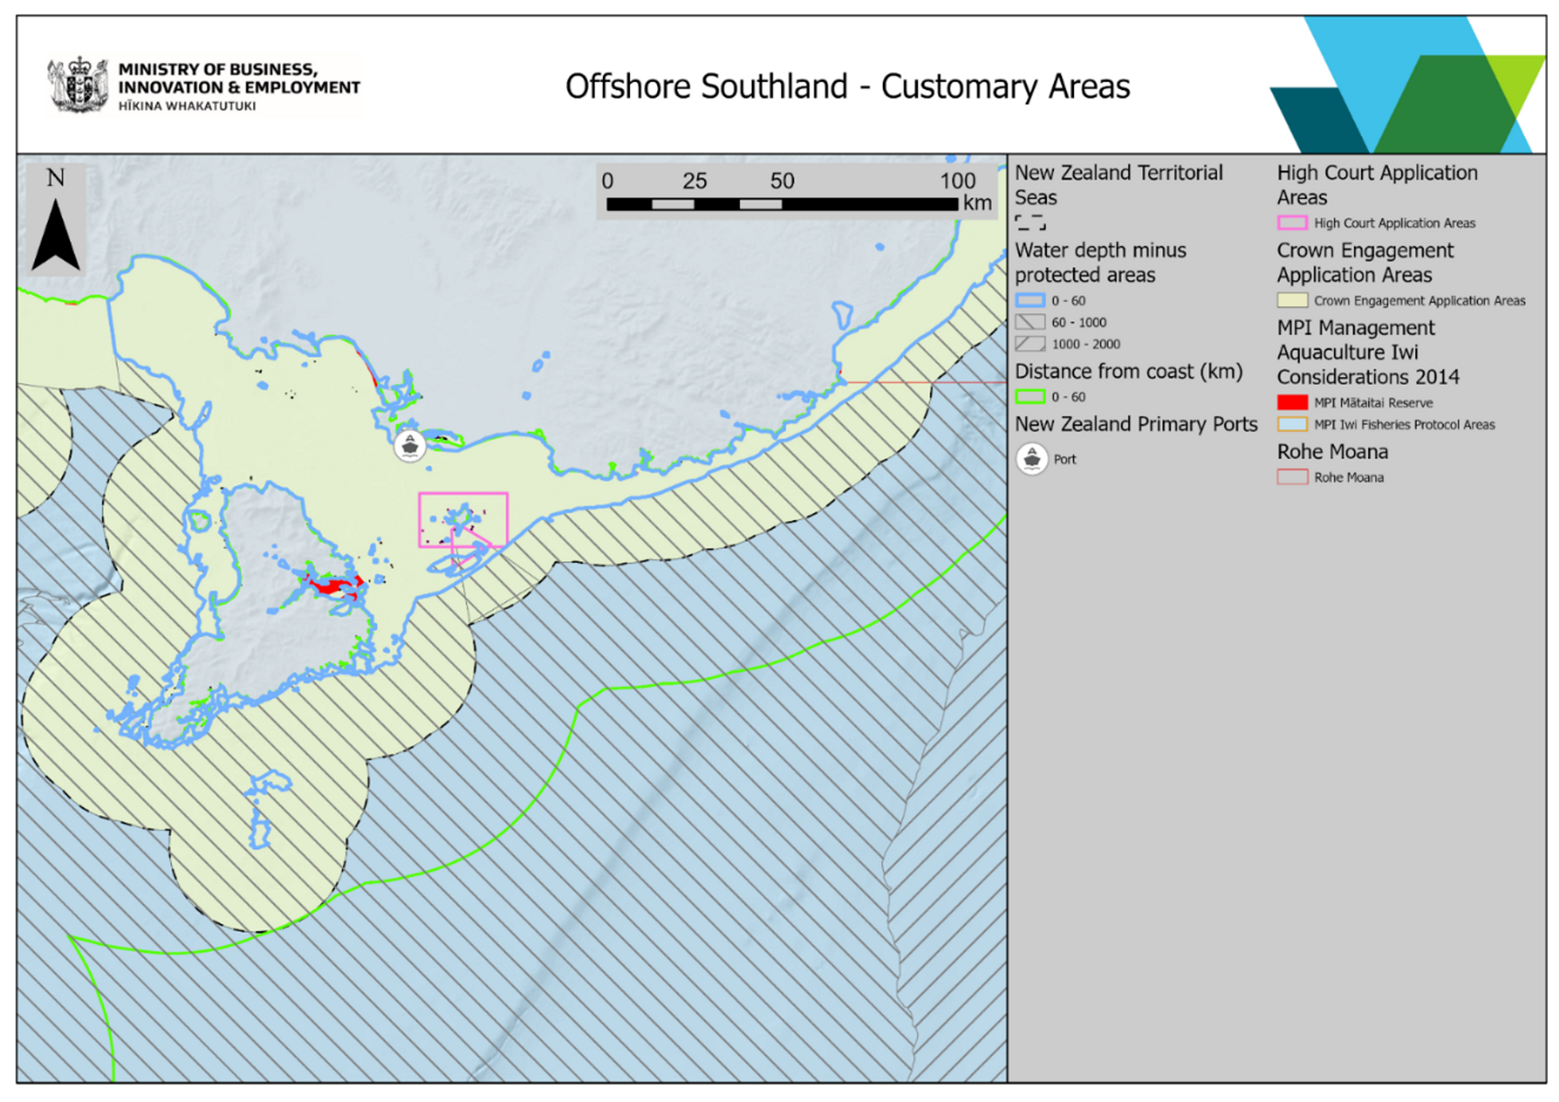 Annex5 offshore southland customary areas